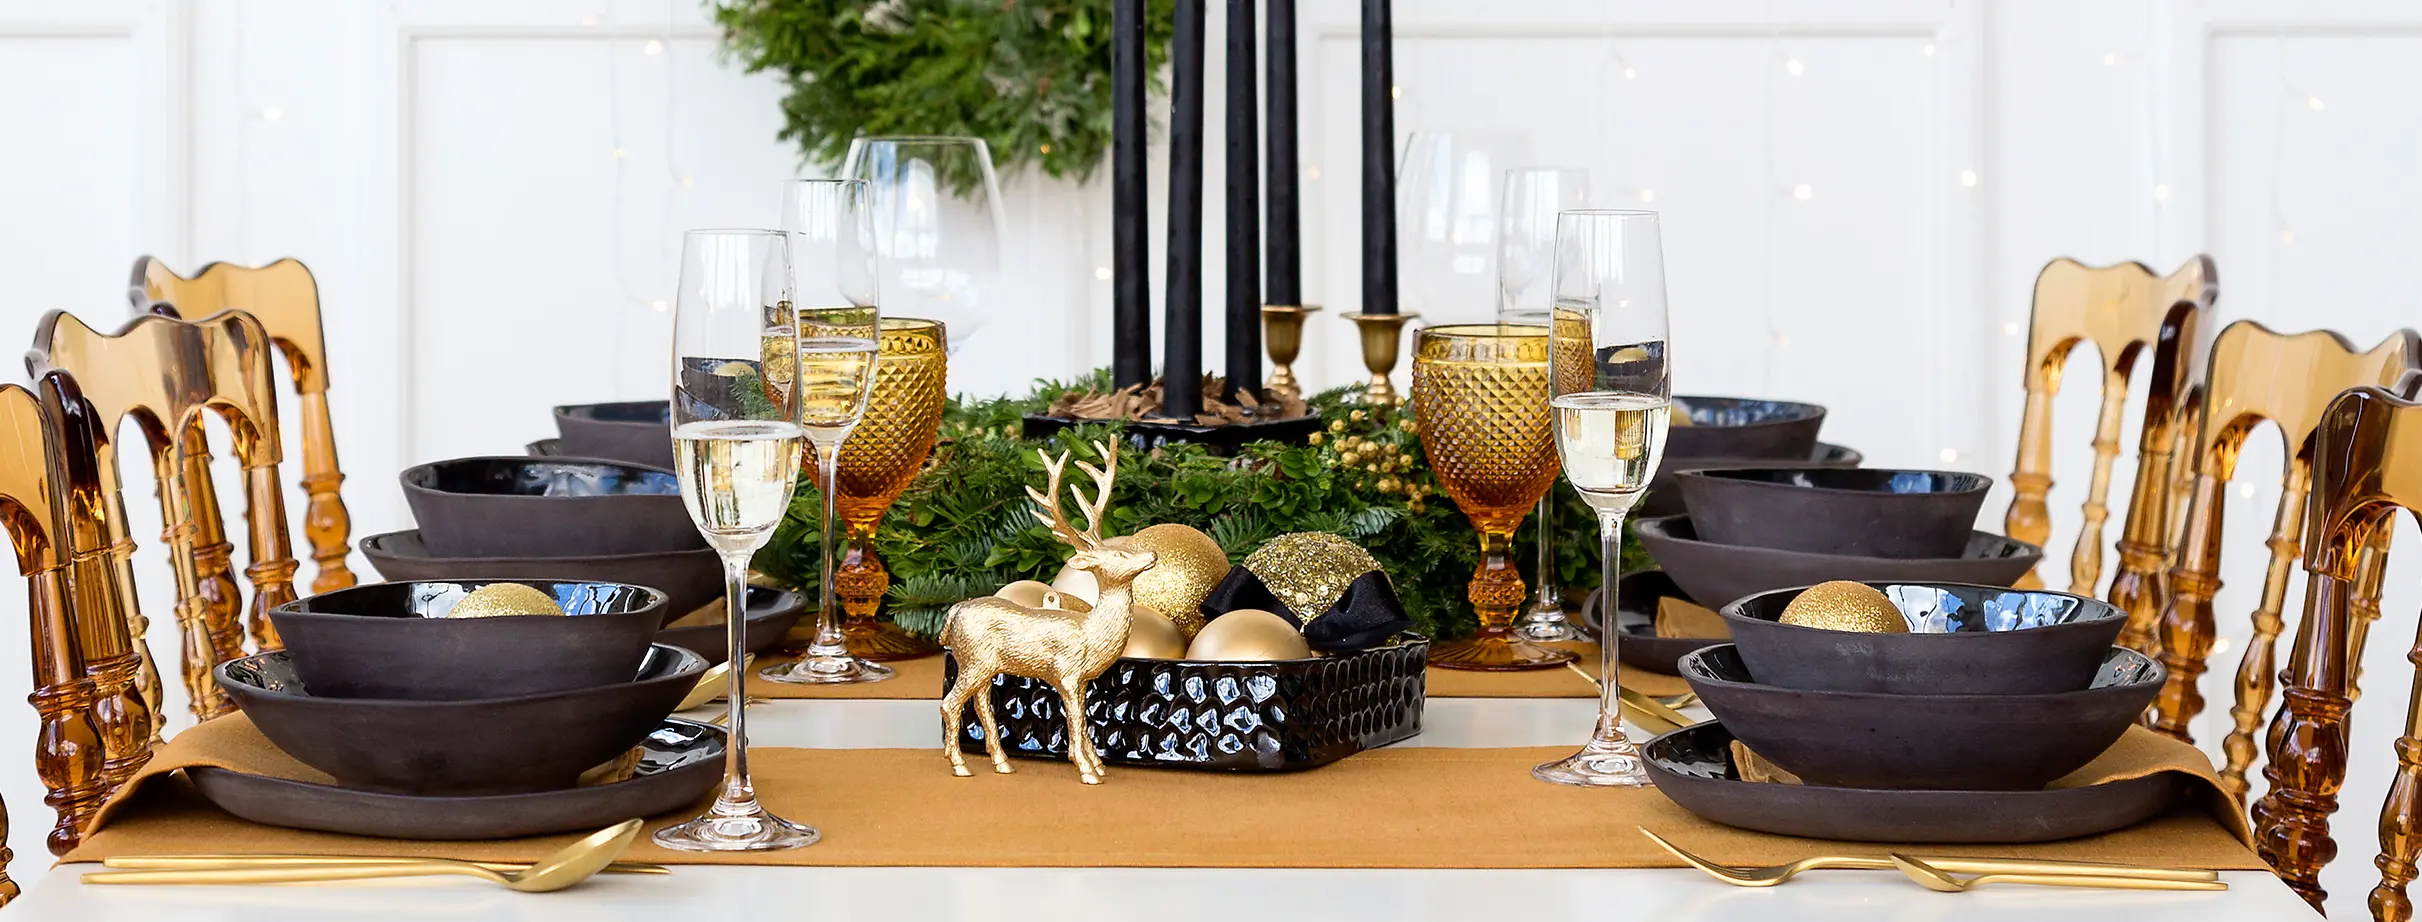 Create Your Own Holiday Tablescape